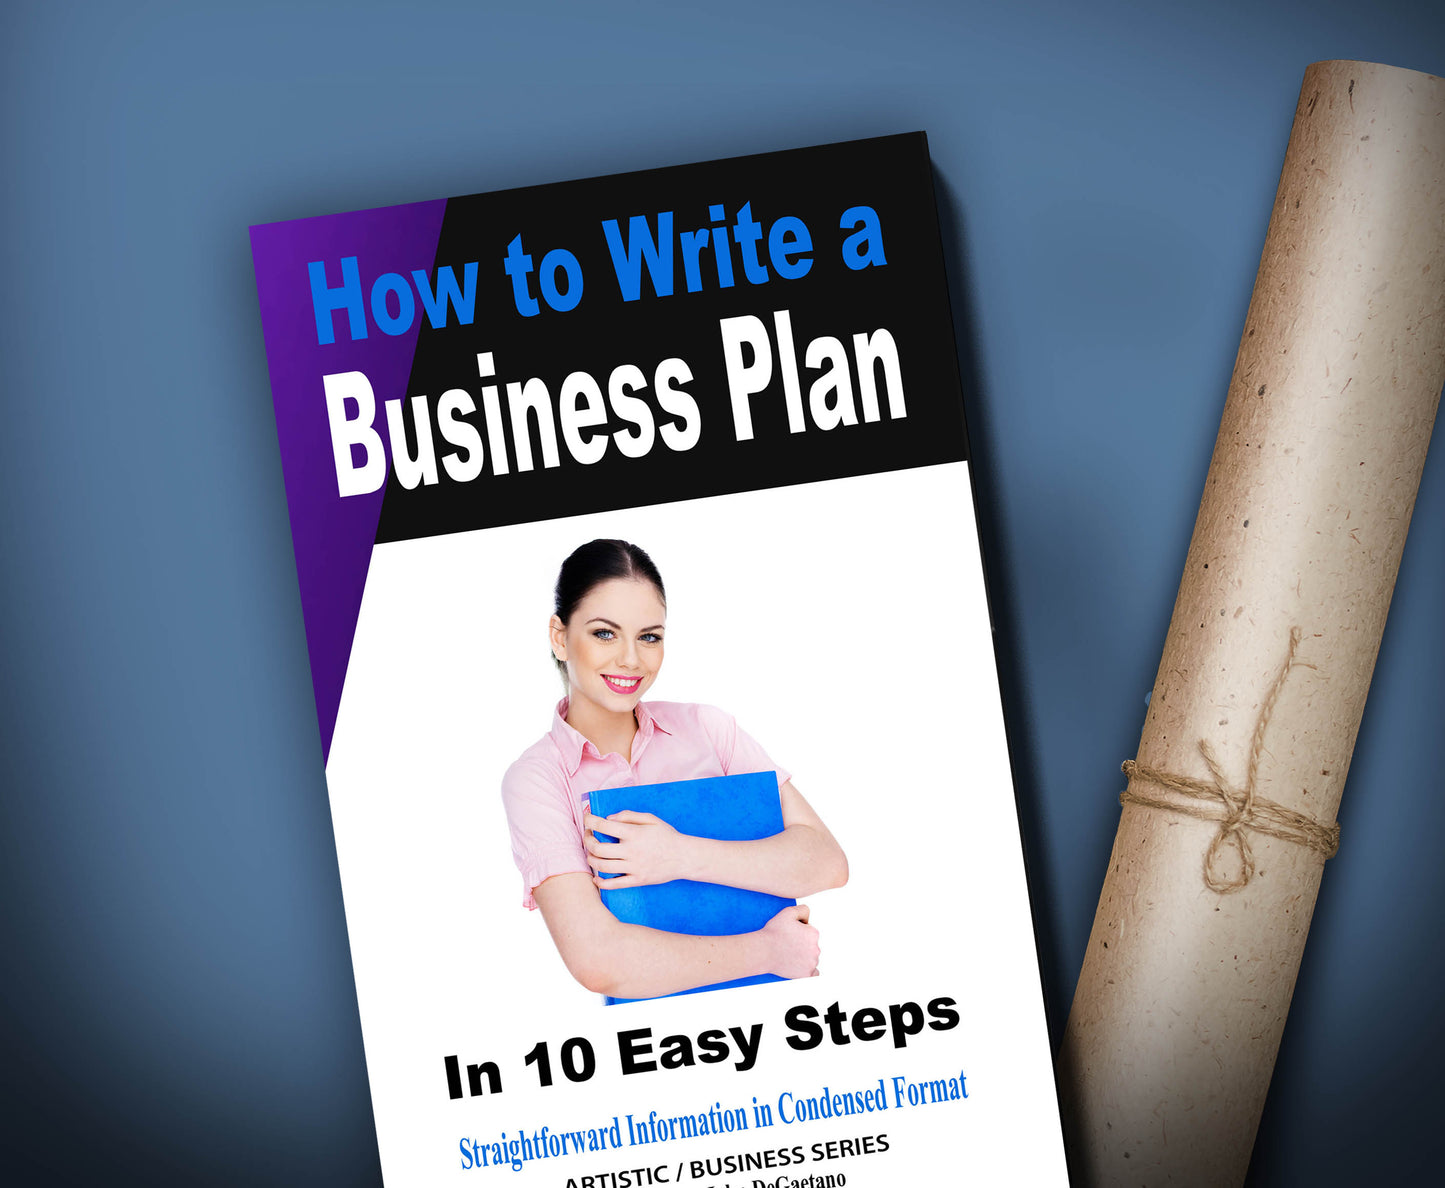 How to write a Business Plan Book cover